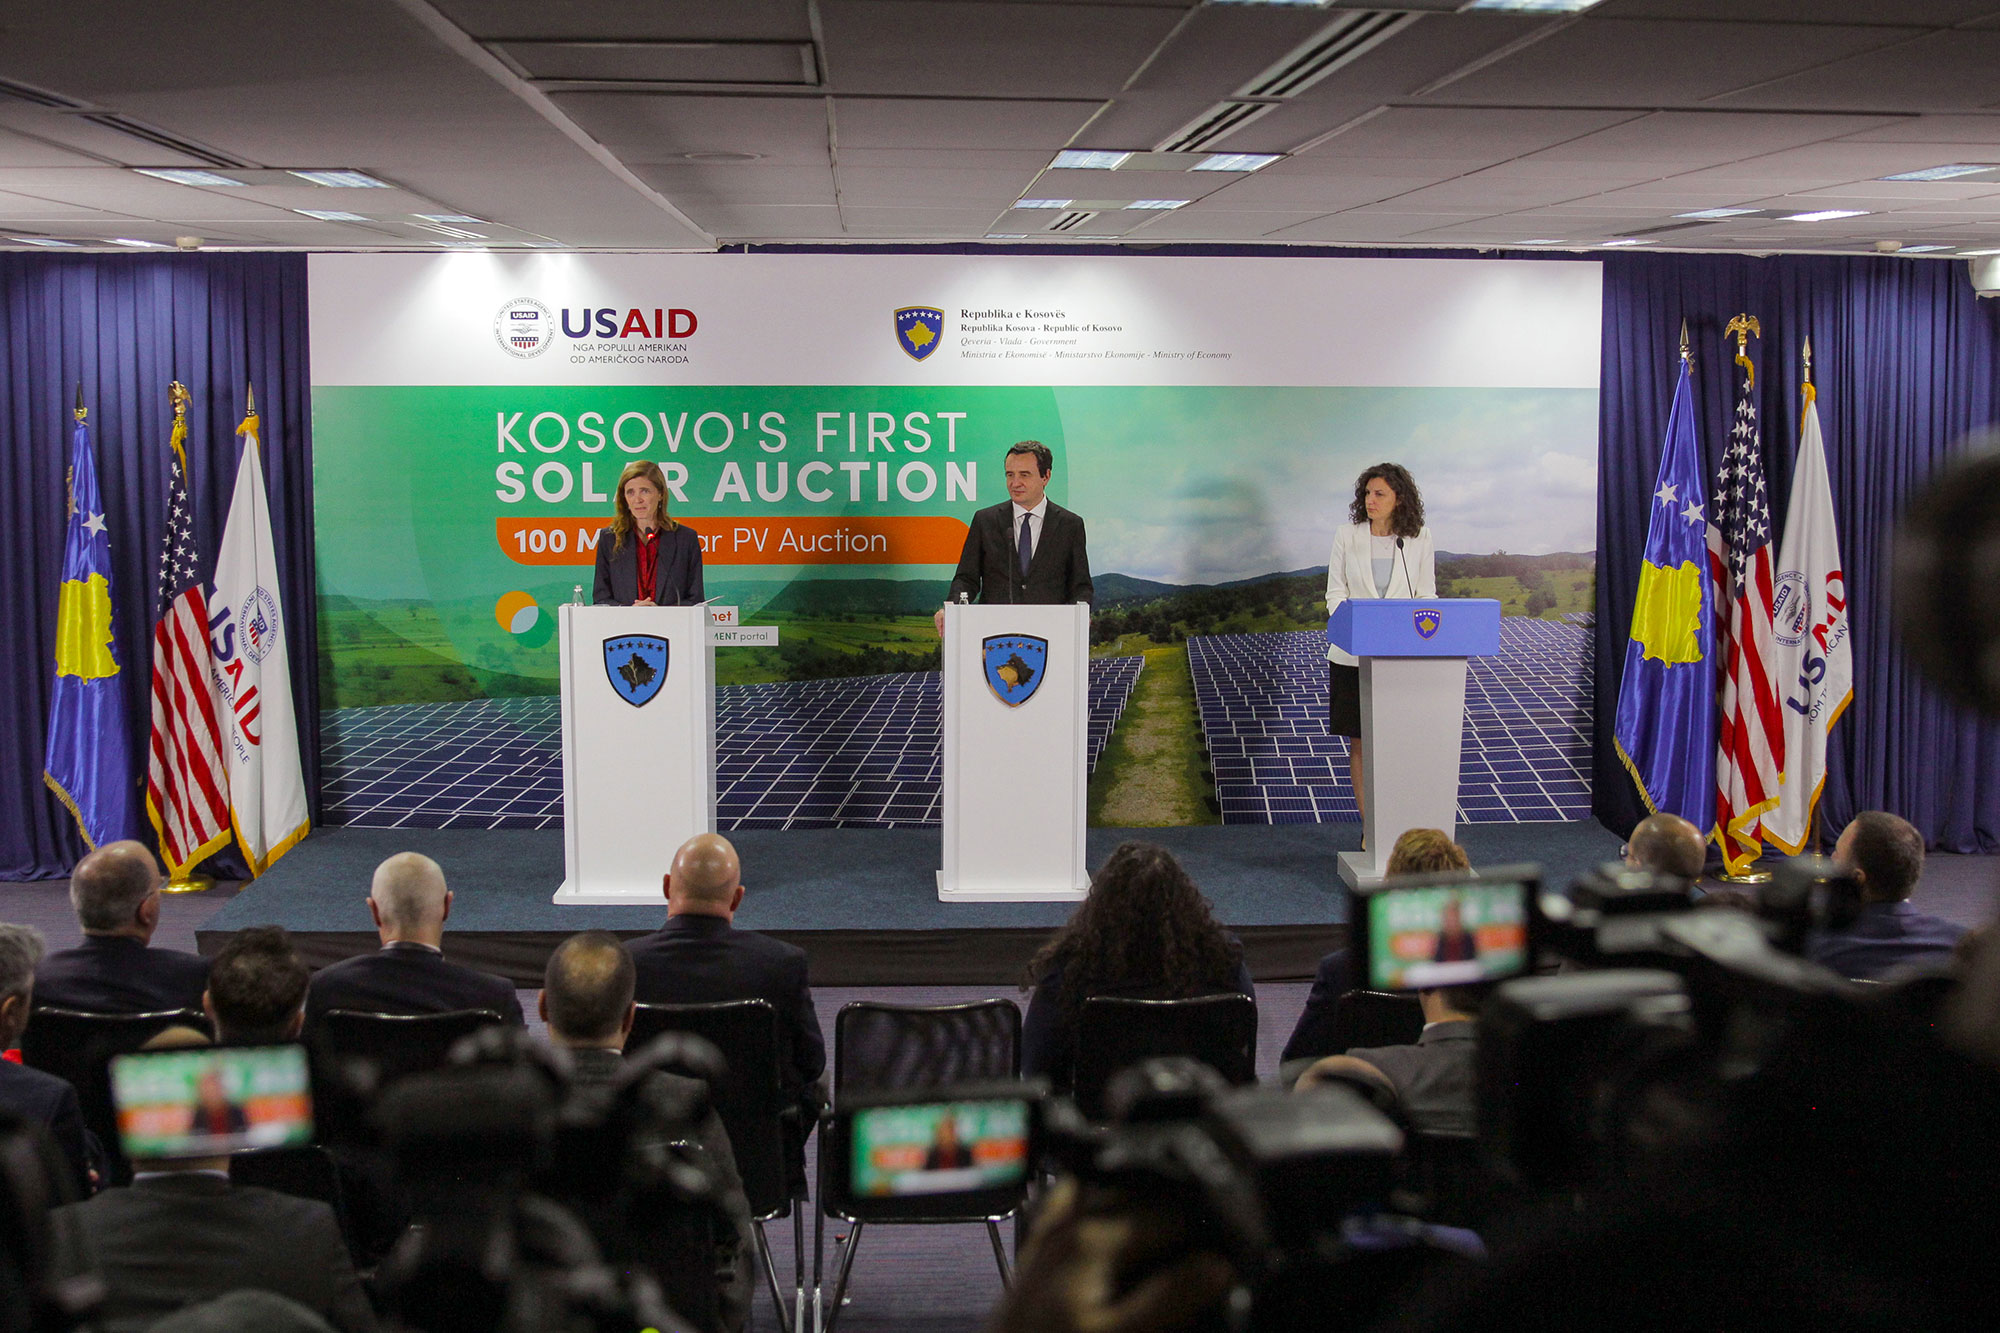 The first auction for the solar energy park with a capacity of 100 MW announced